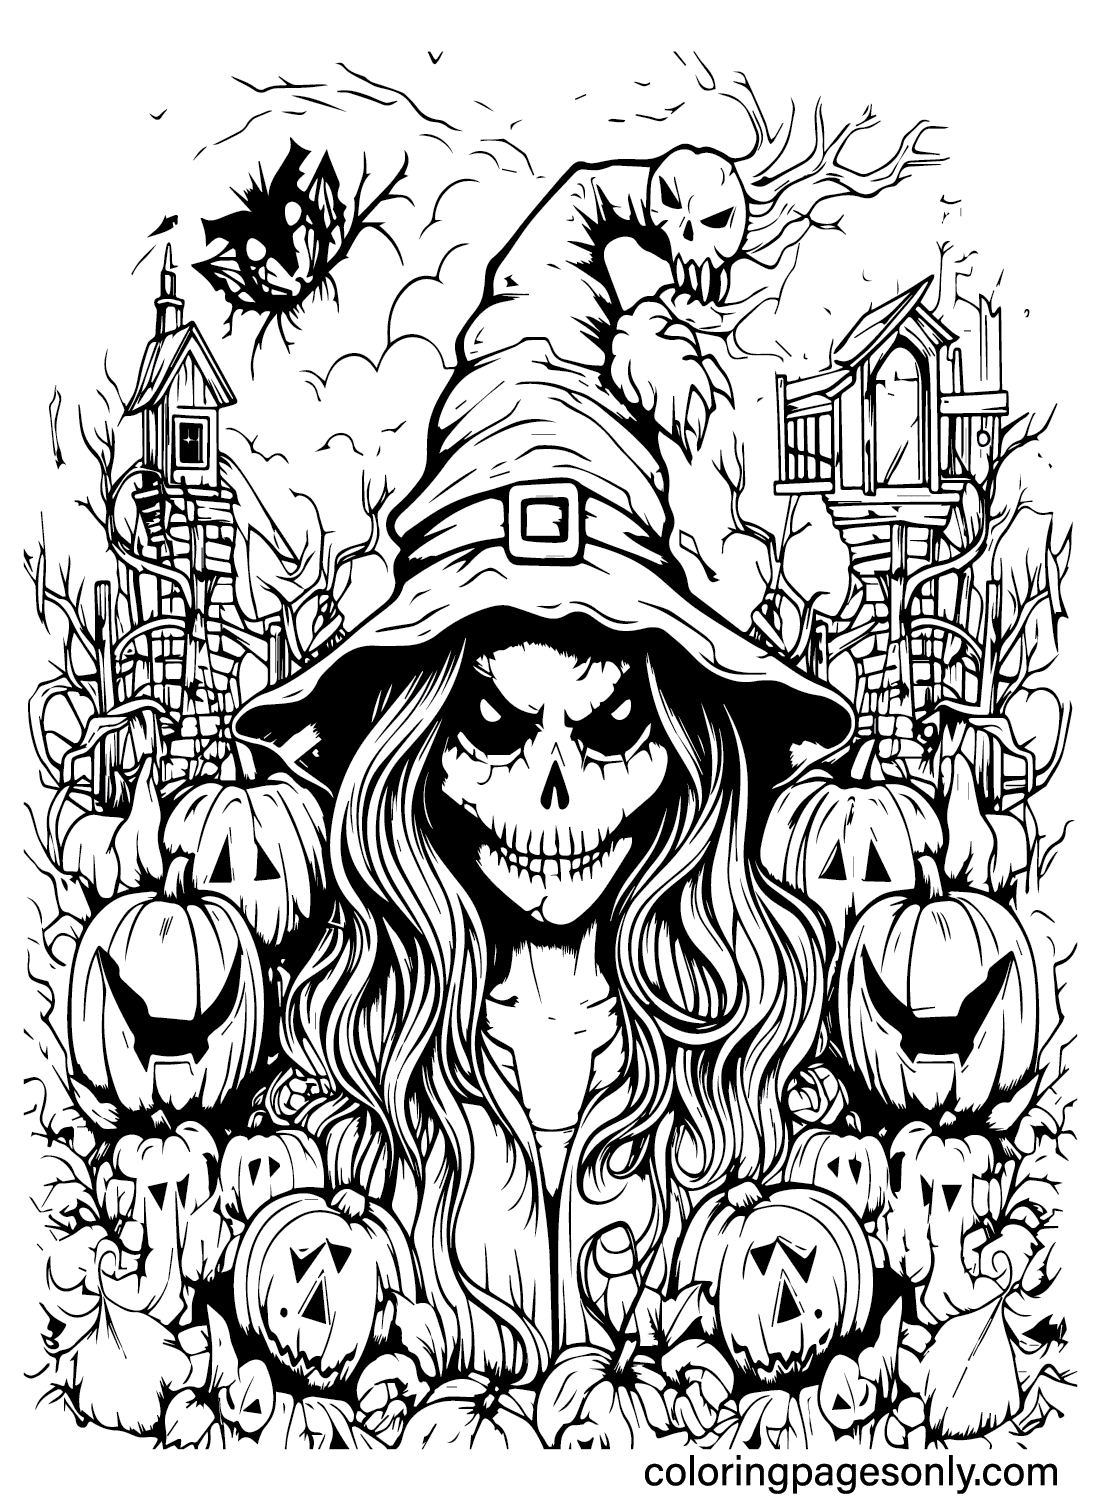 Very Scary Halloween Coloring Page from Spooktacular Halloween